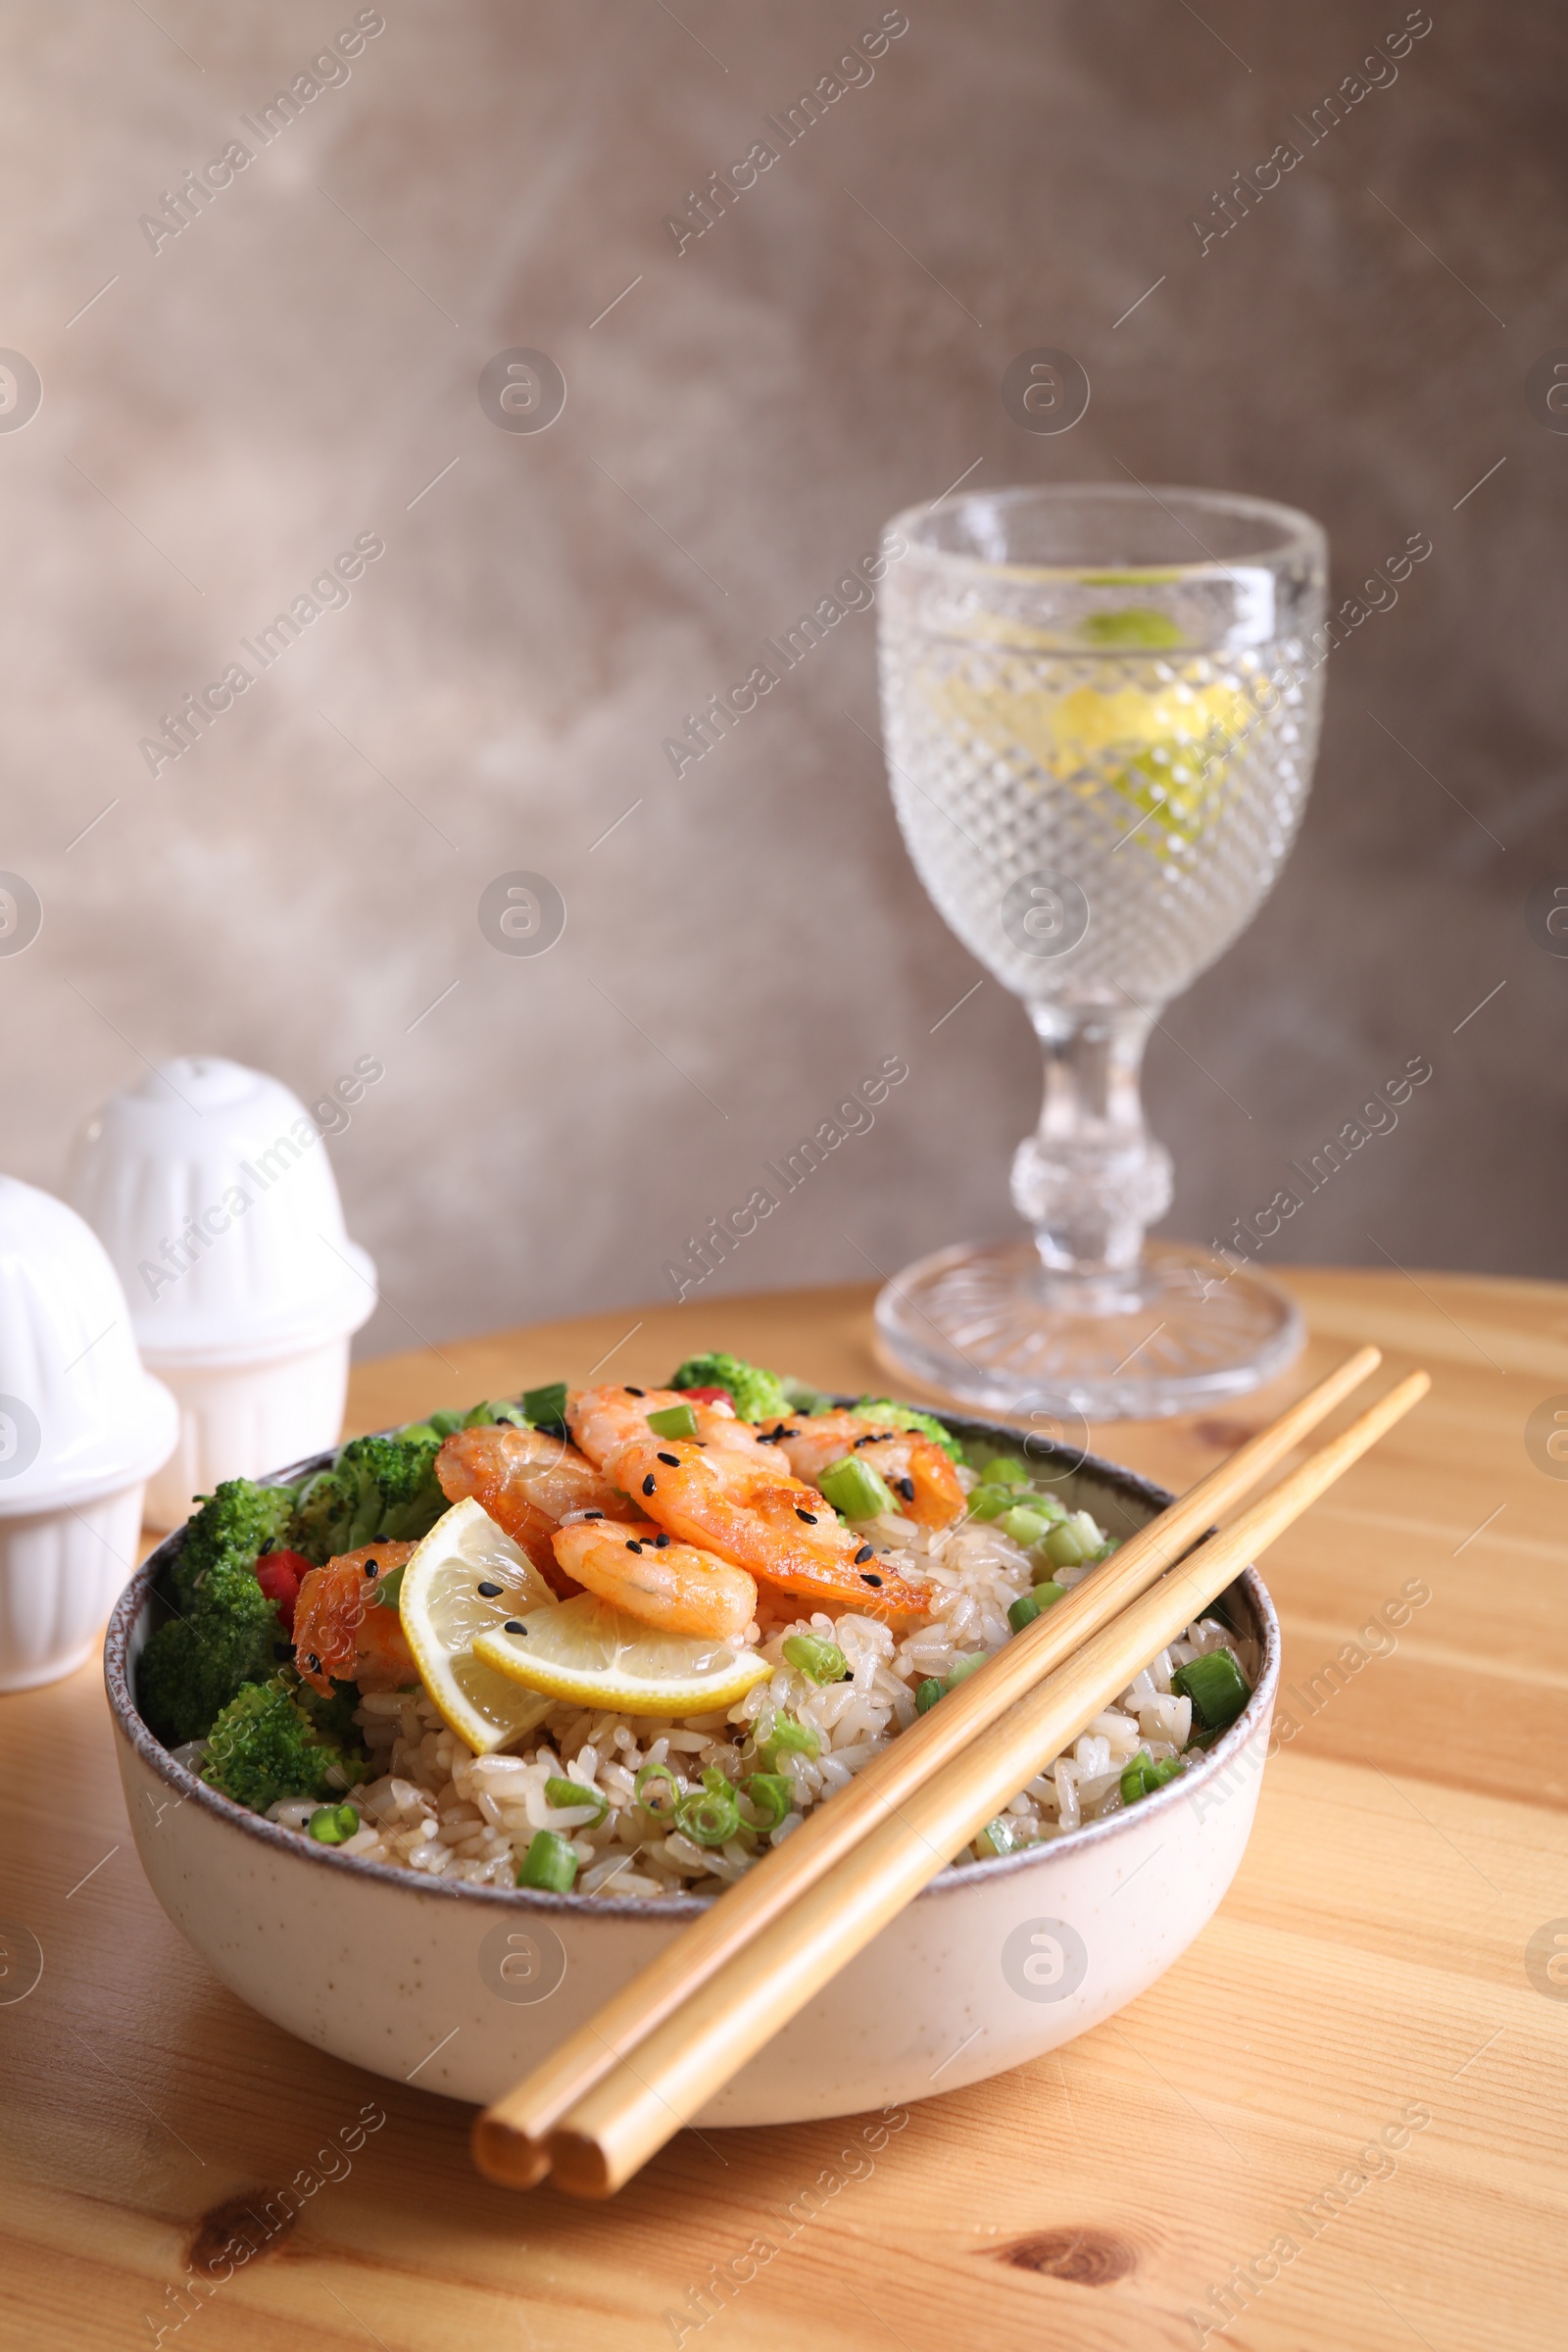 Photo of Tasty rice with shrimps and vegetables served on wooden table